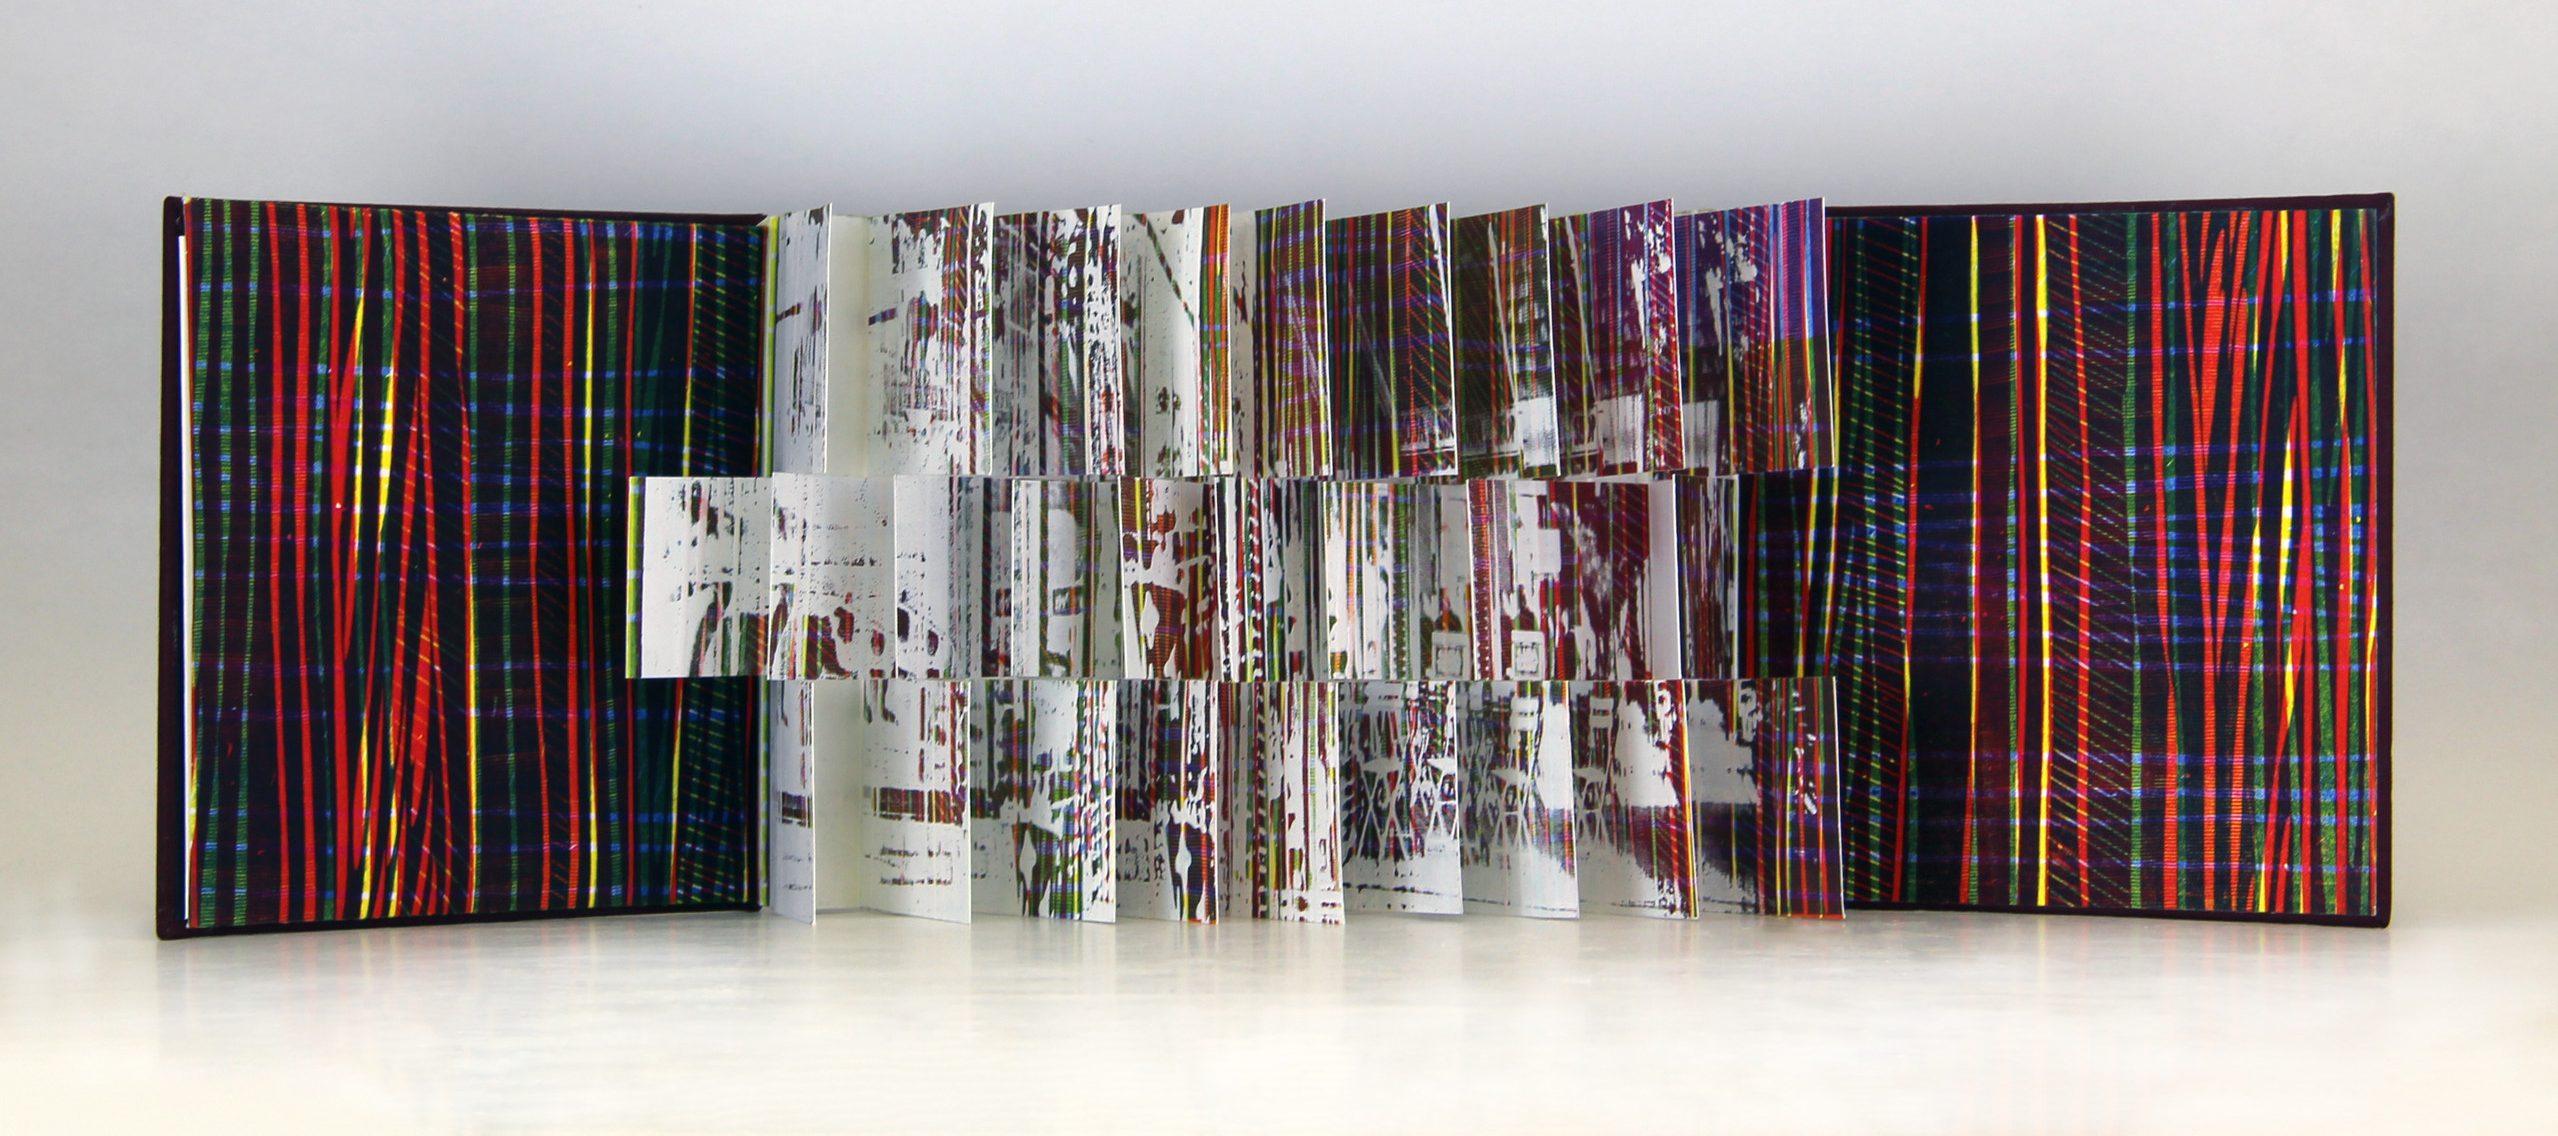 A photograph of an open flag book with red, blue, and yellow diagonal stripes inside the front and back covers. The interior pages are each cut into three sections creating three rows of flags with white splatter paint and multicolored stripes.